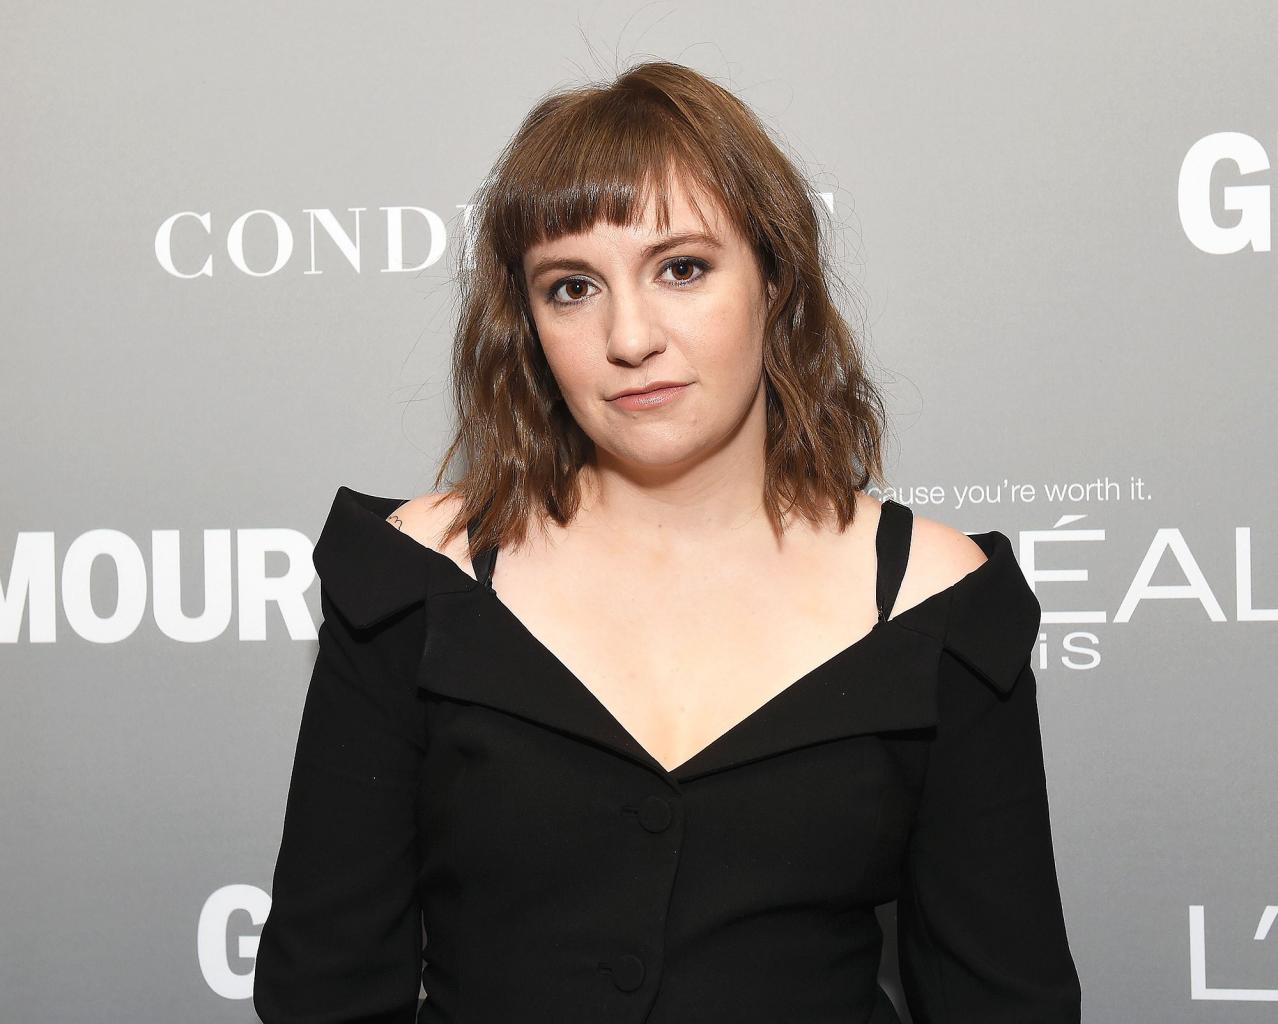 Lena Dunham Says Sheâ€™s Had Her Period for 13 Days